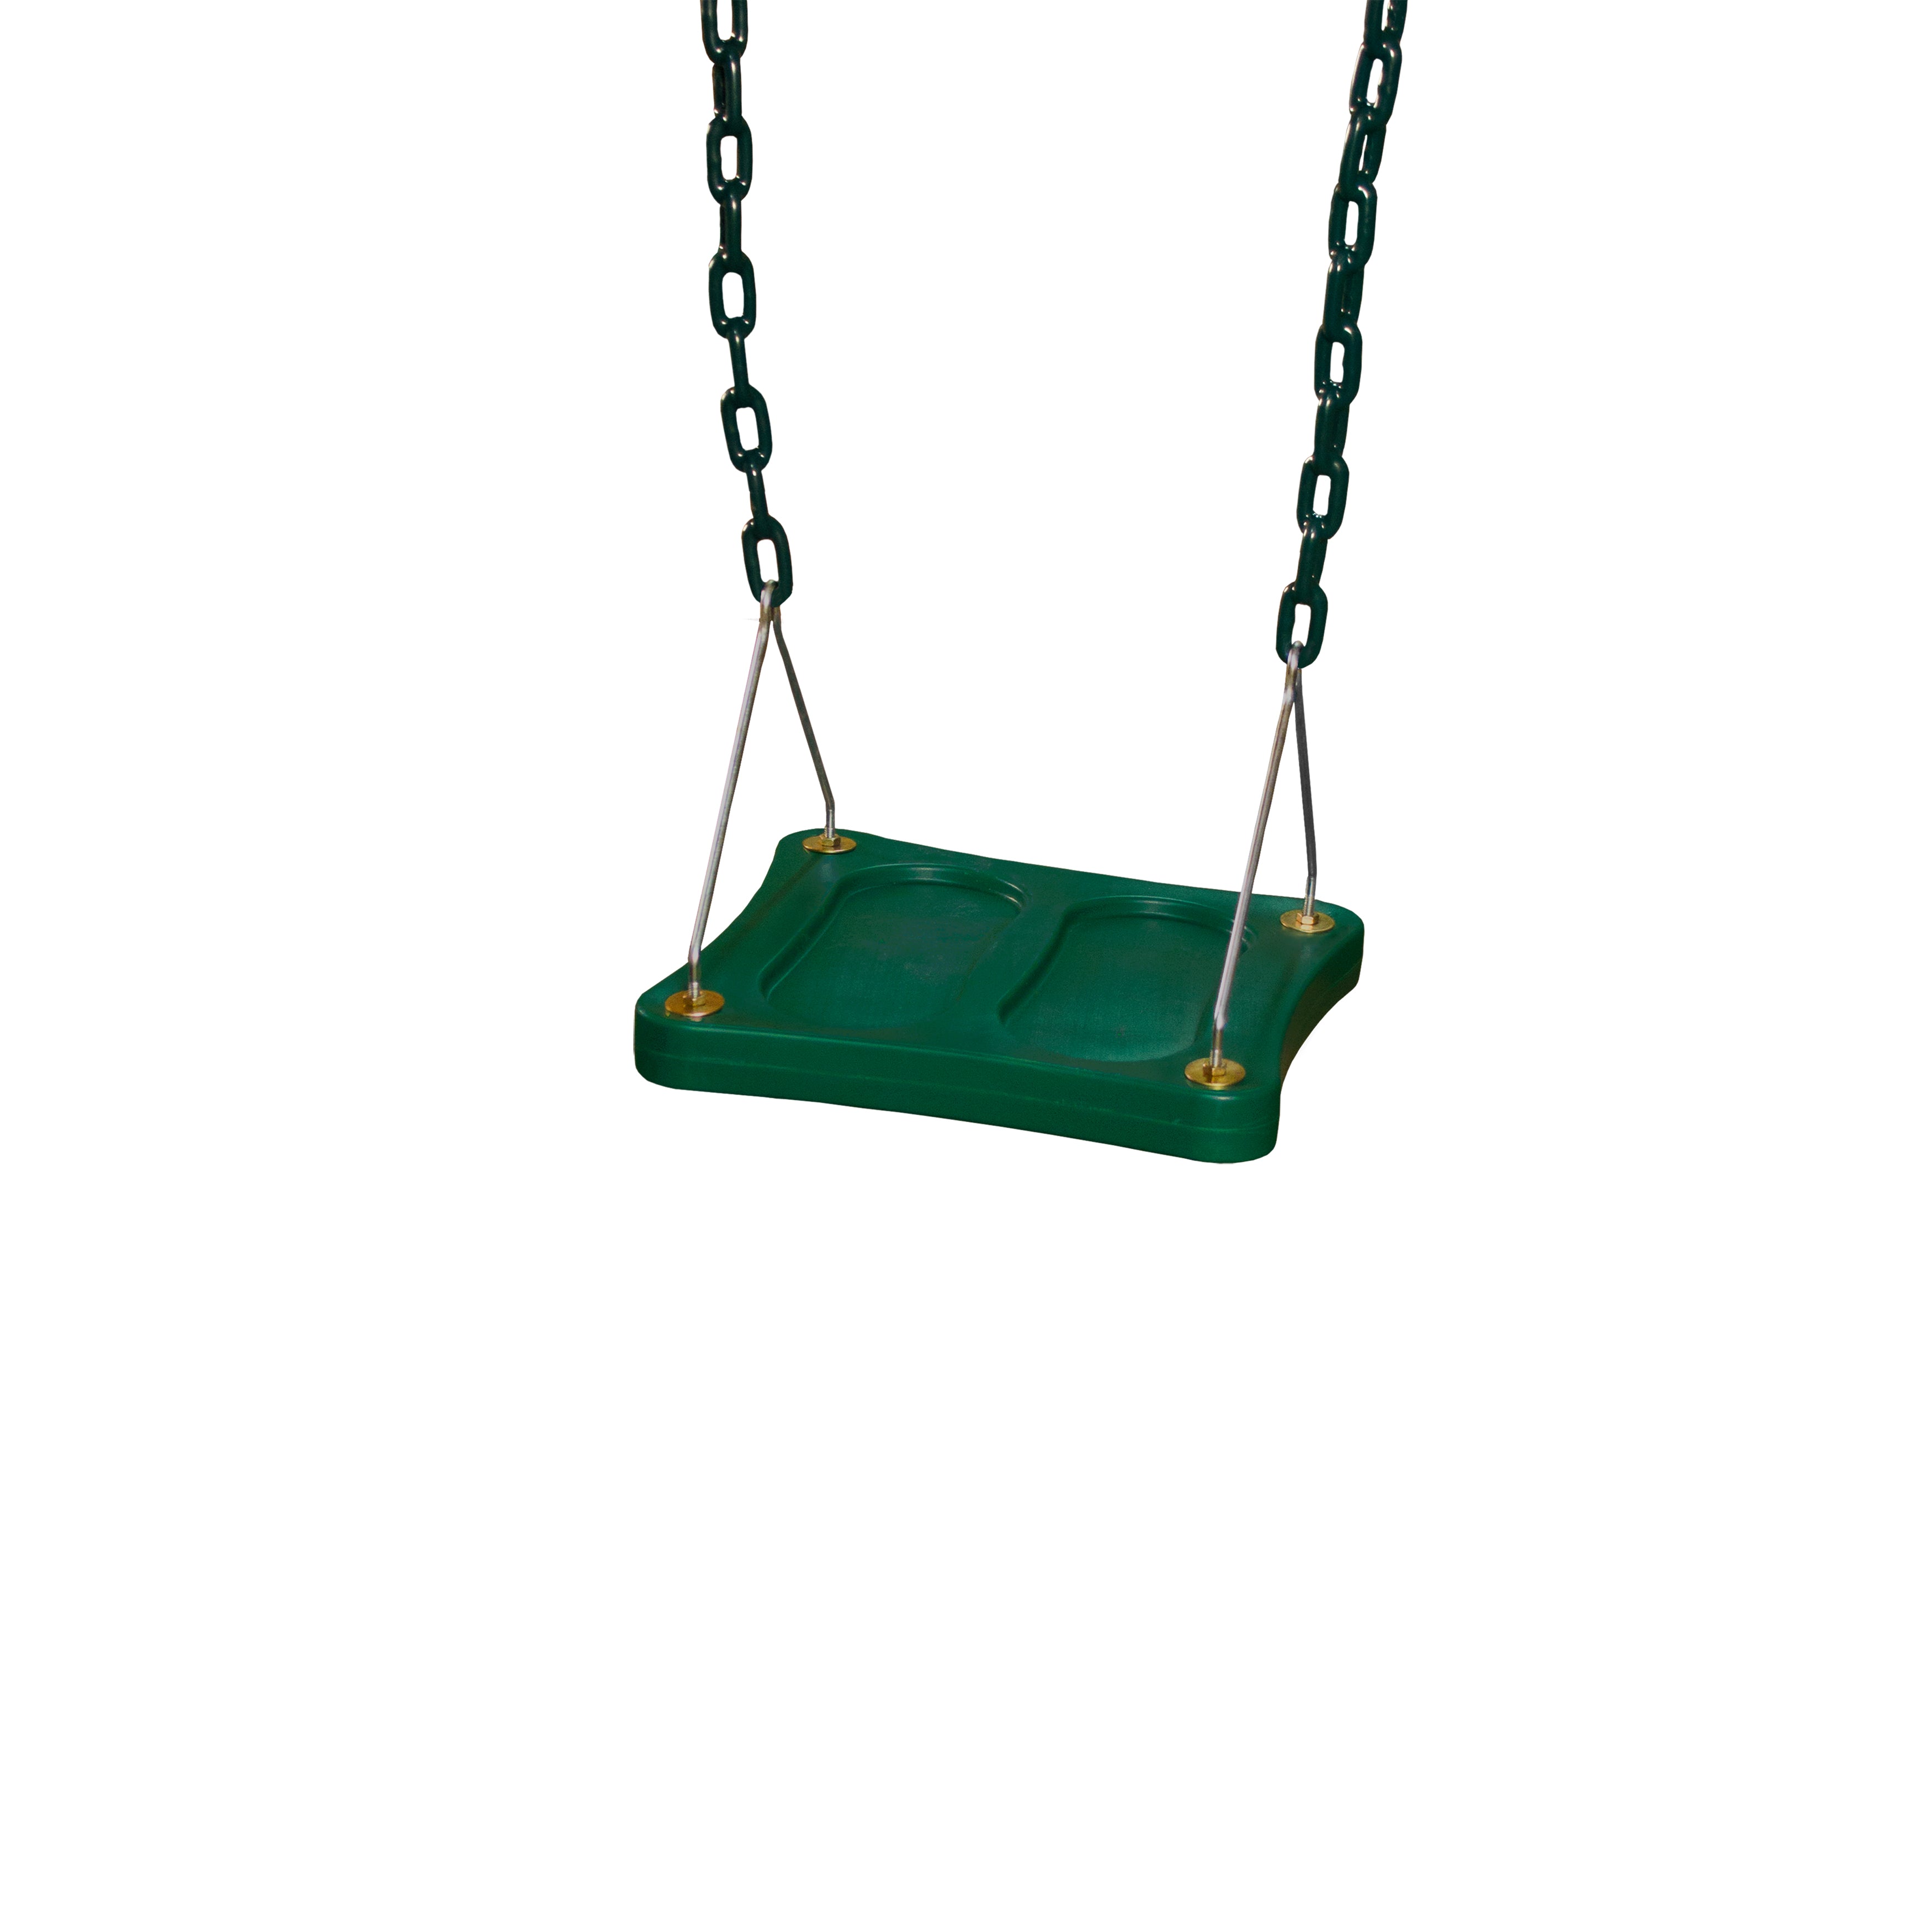 Stand 'N Swing